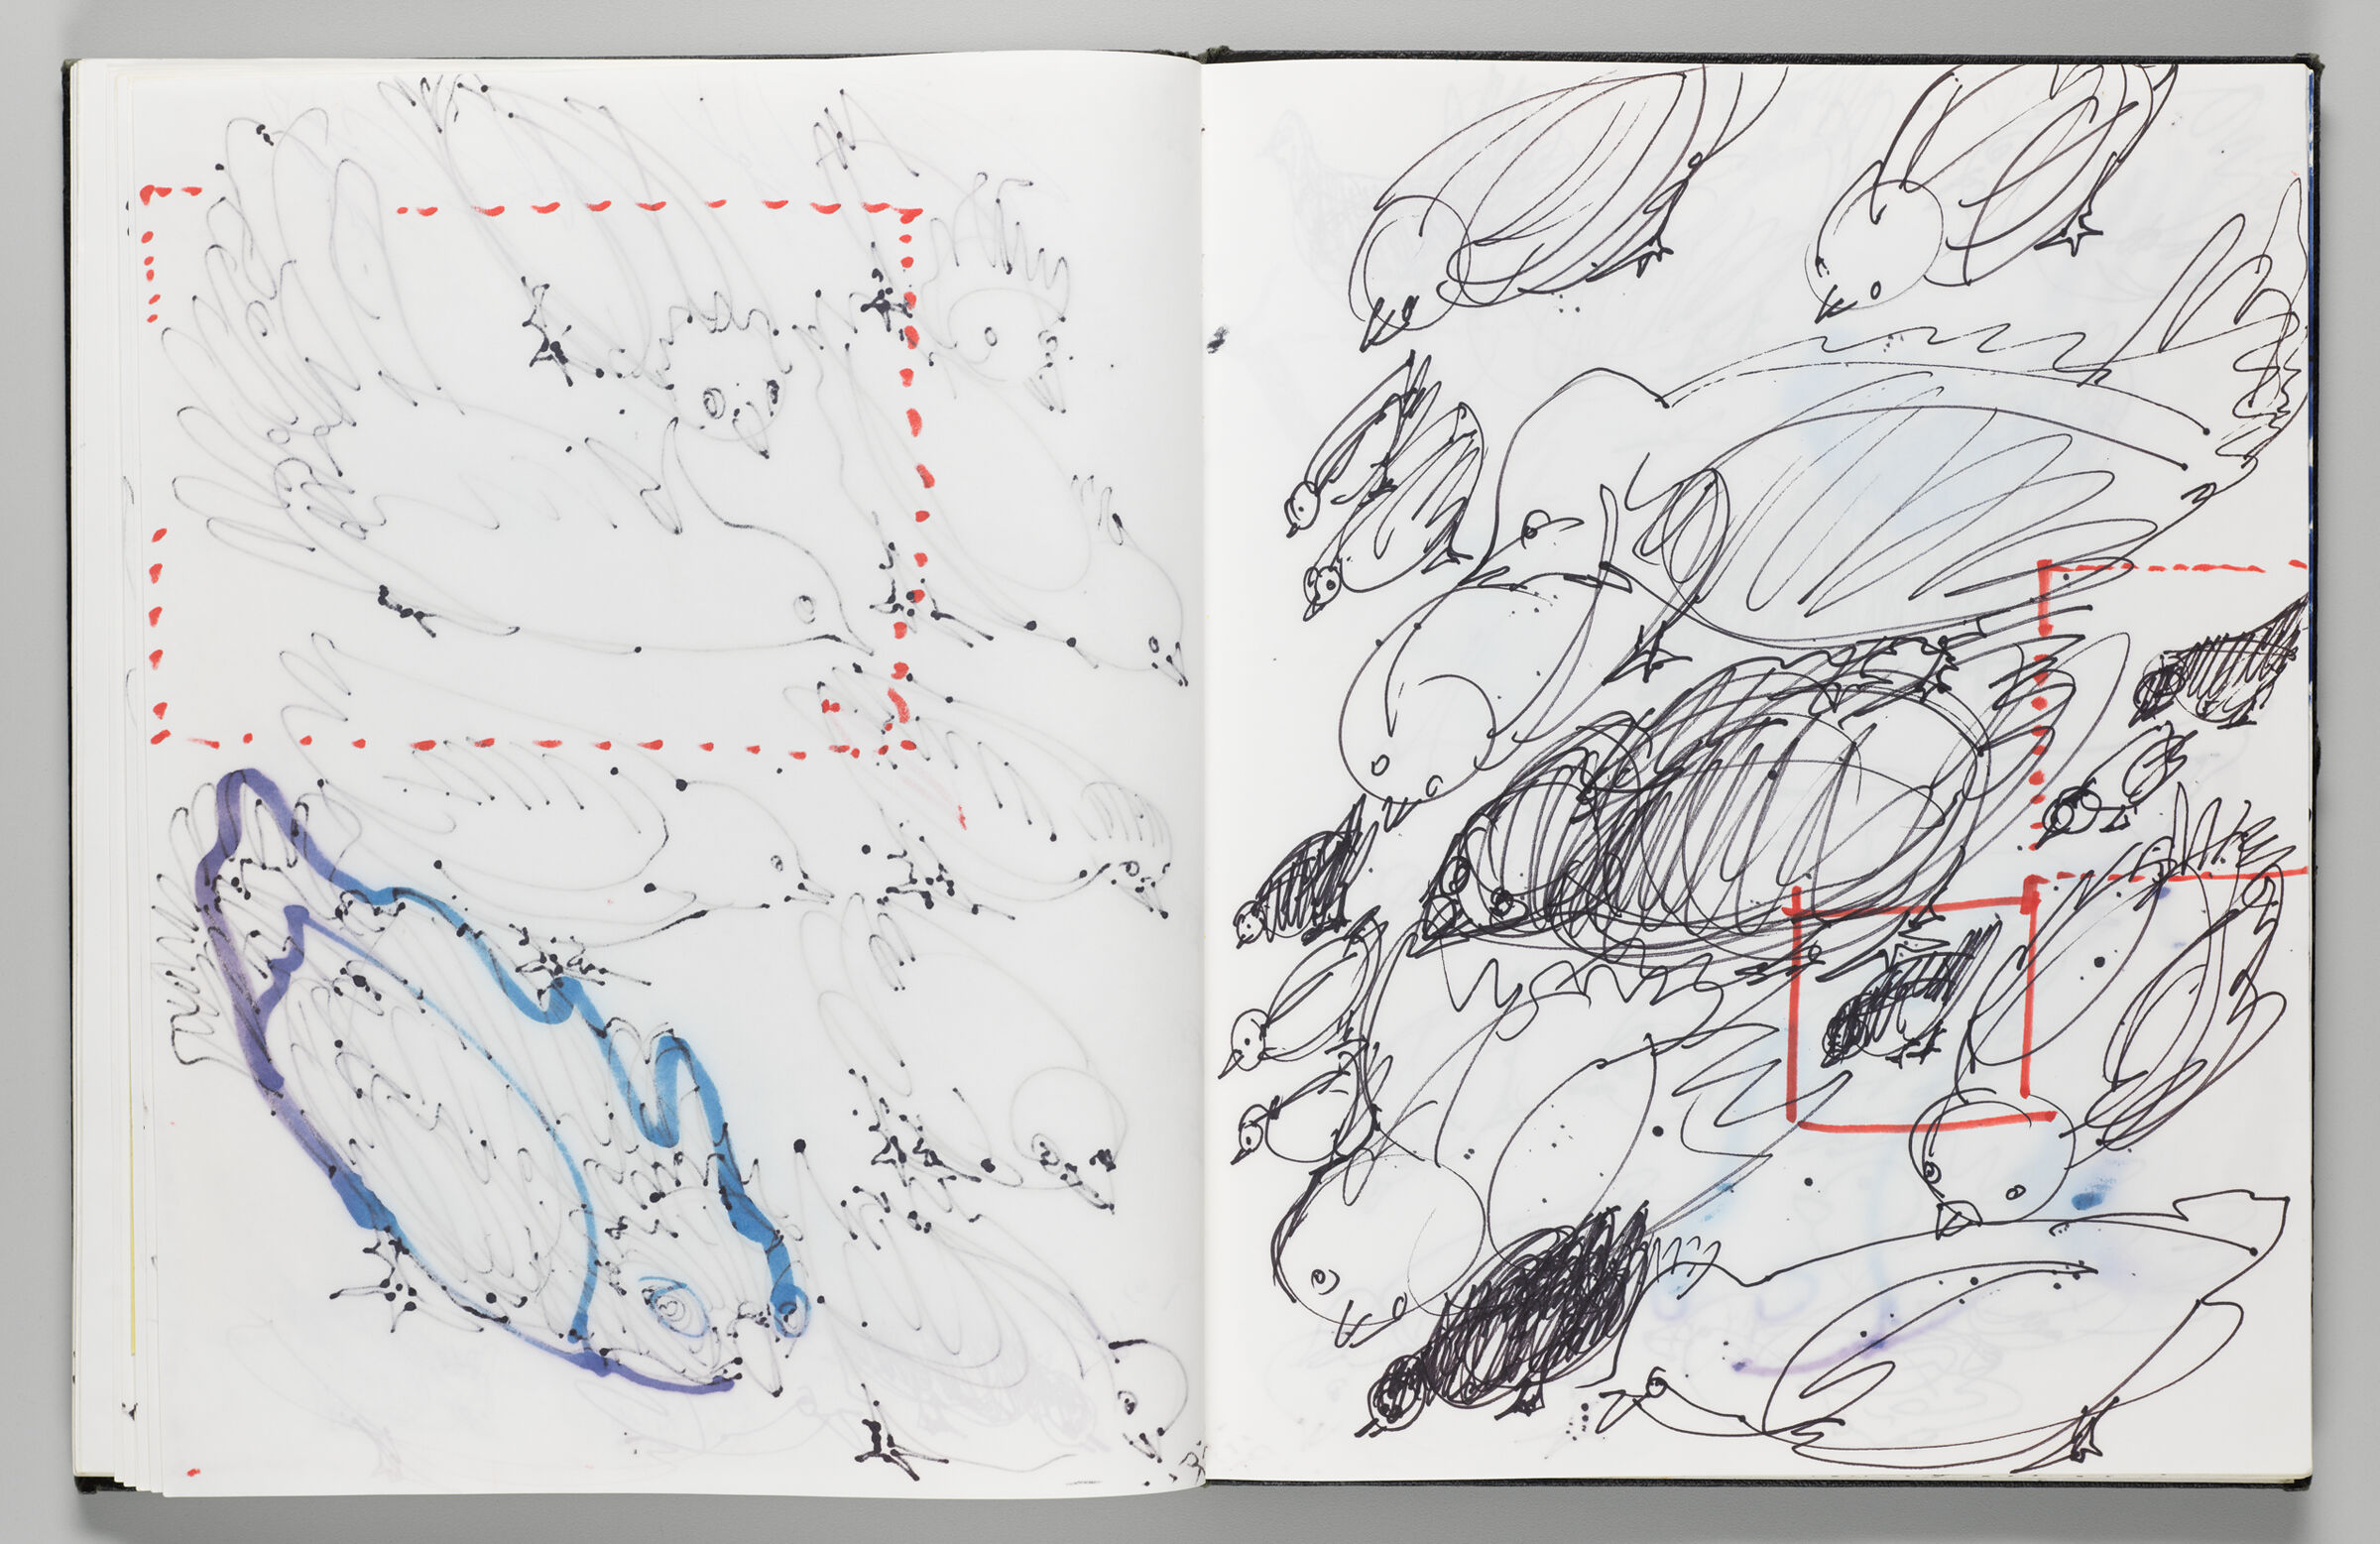 Untitled (Bleed-Through Of Previous Page, Left Page); Untitled (Bird Inflatables With Color Transfer, Right Page)